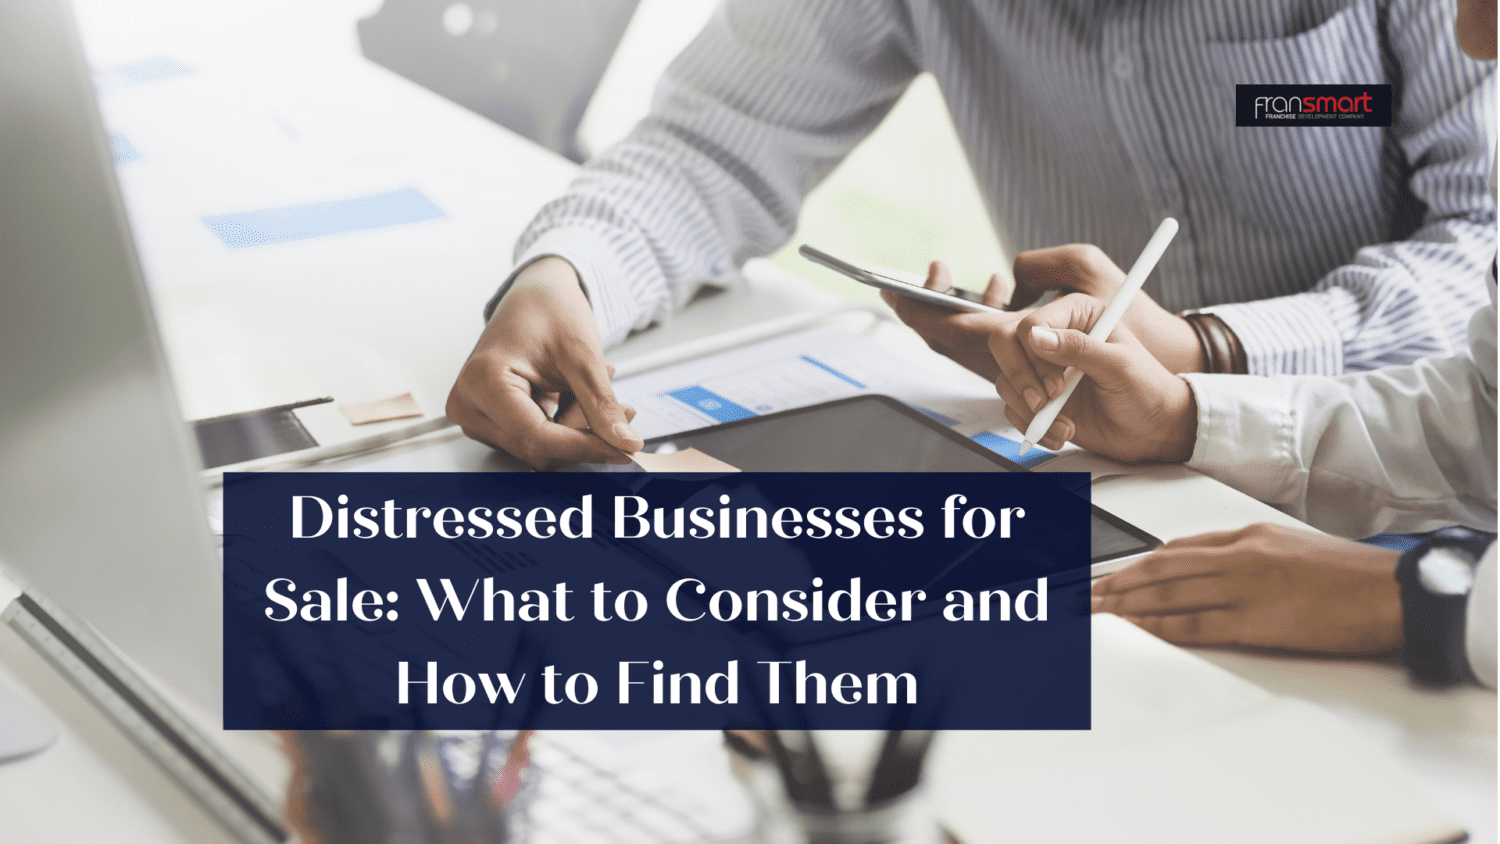 Distressed Businesses for Sale: What to Consider and How to Find Them